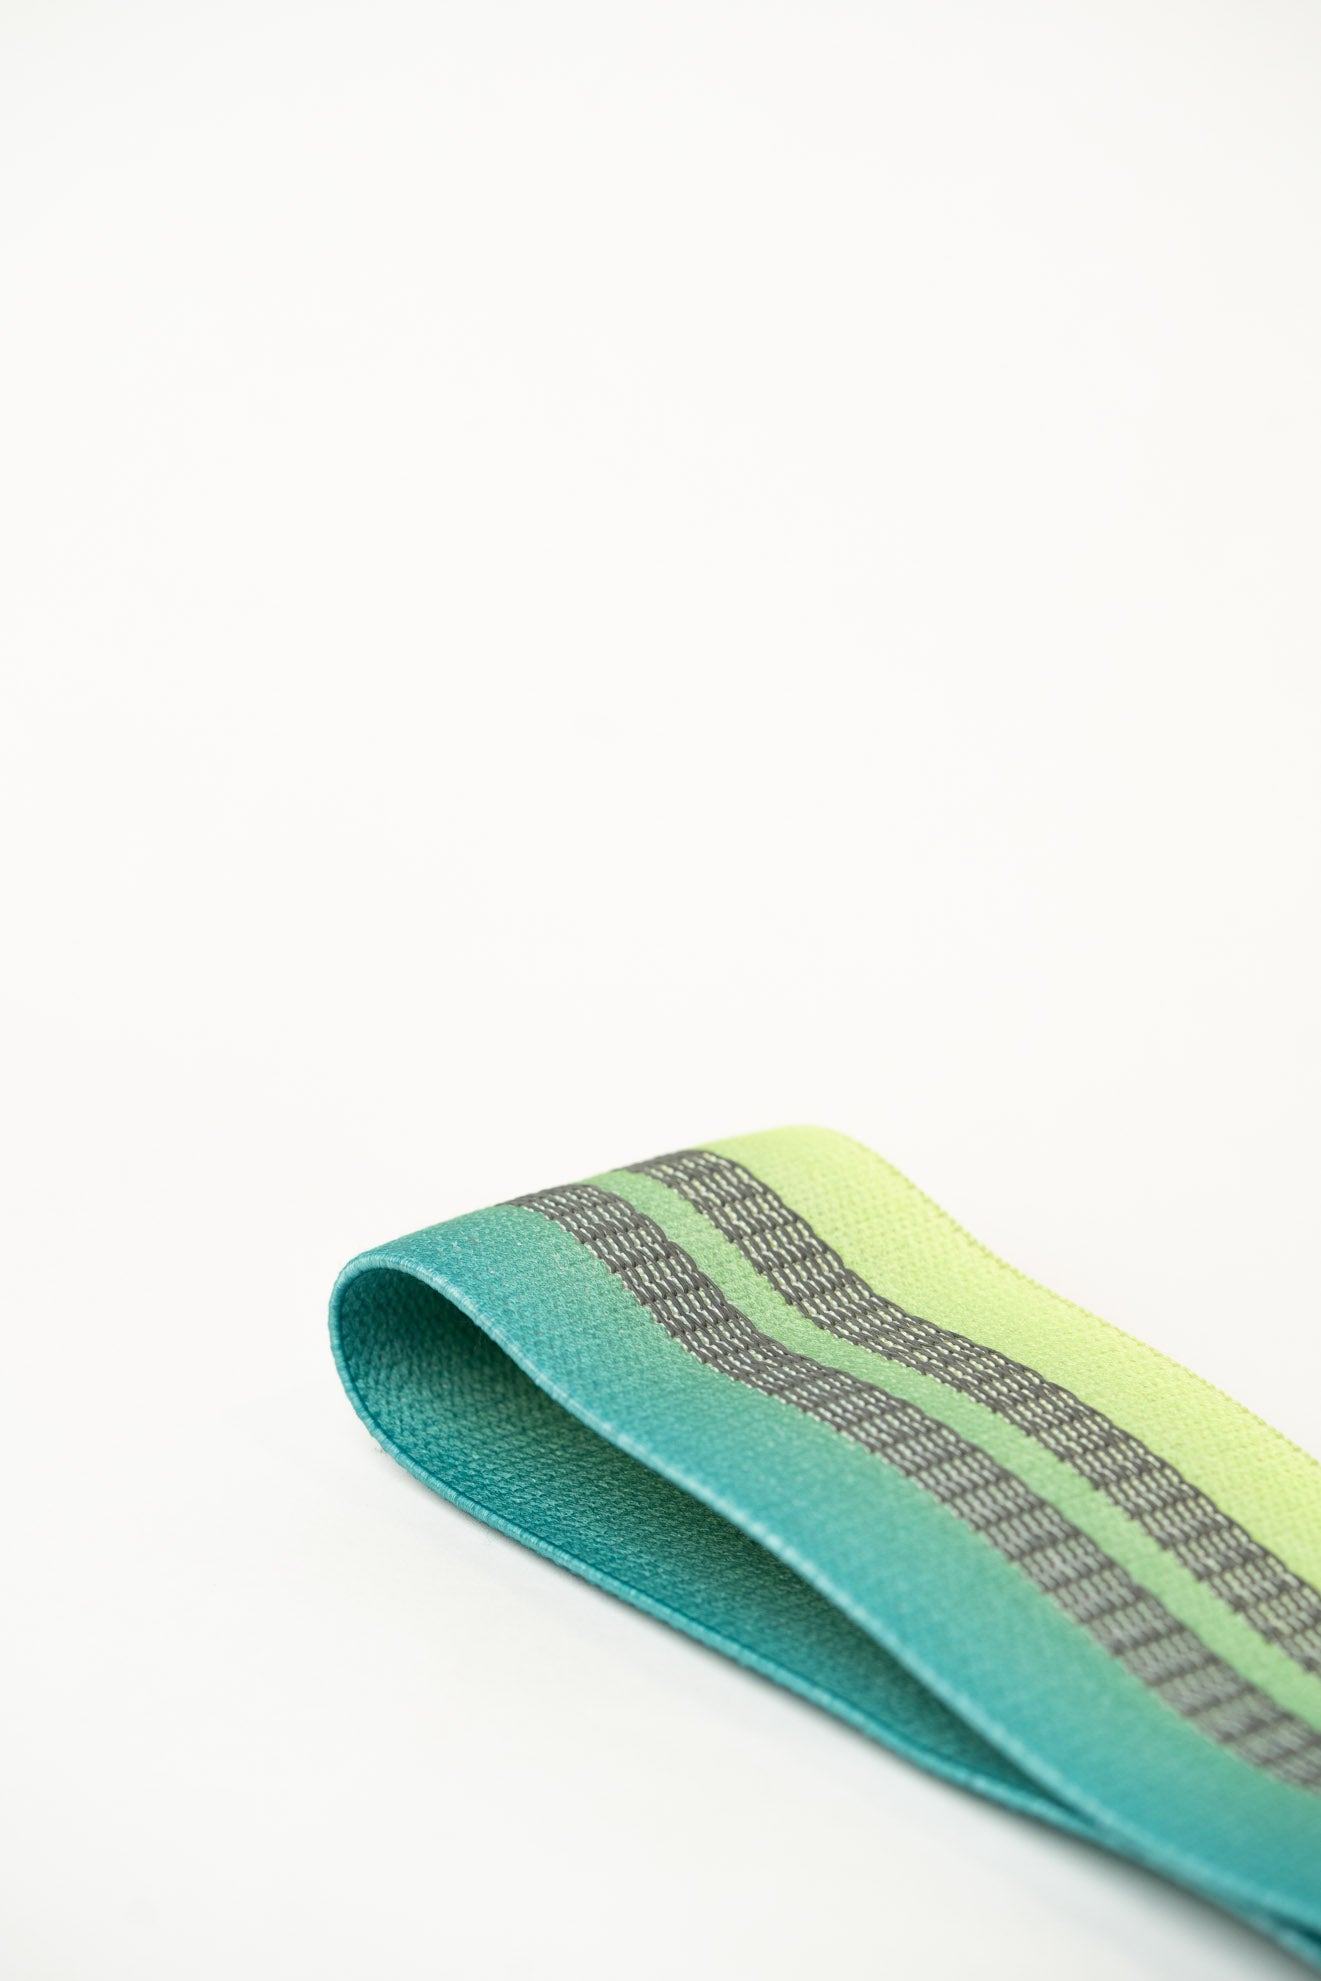 Resistance Band Green Ombré (Heavy)